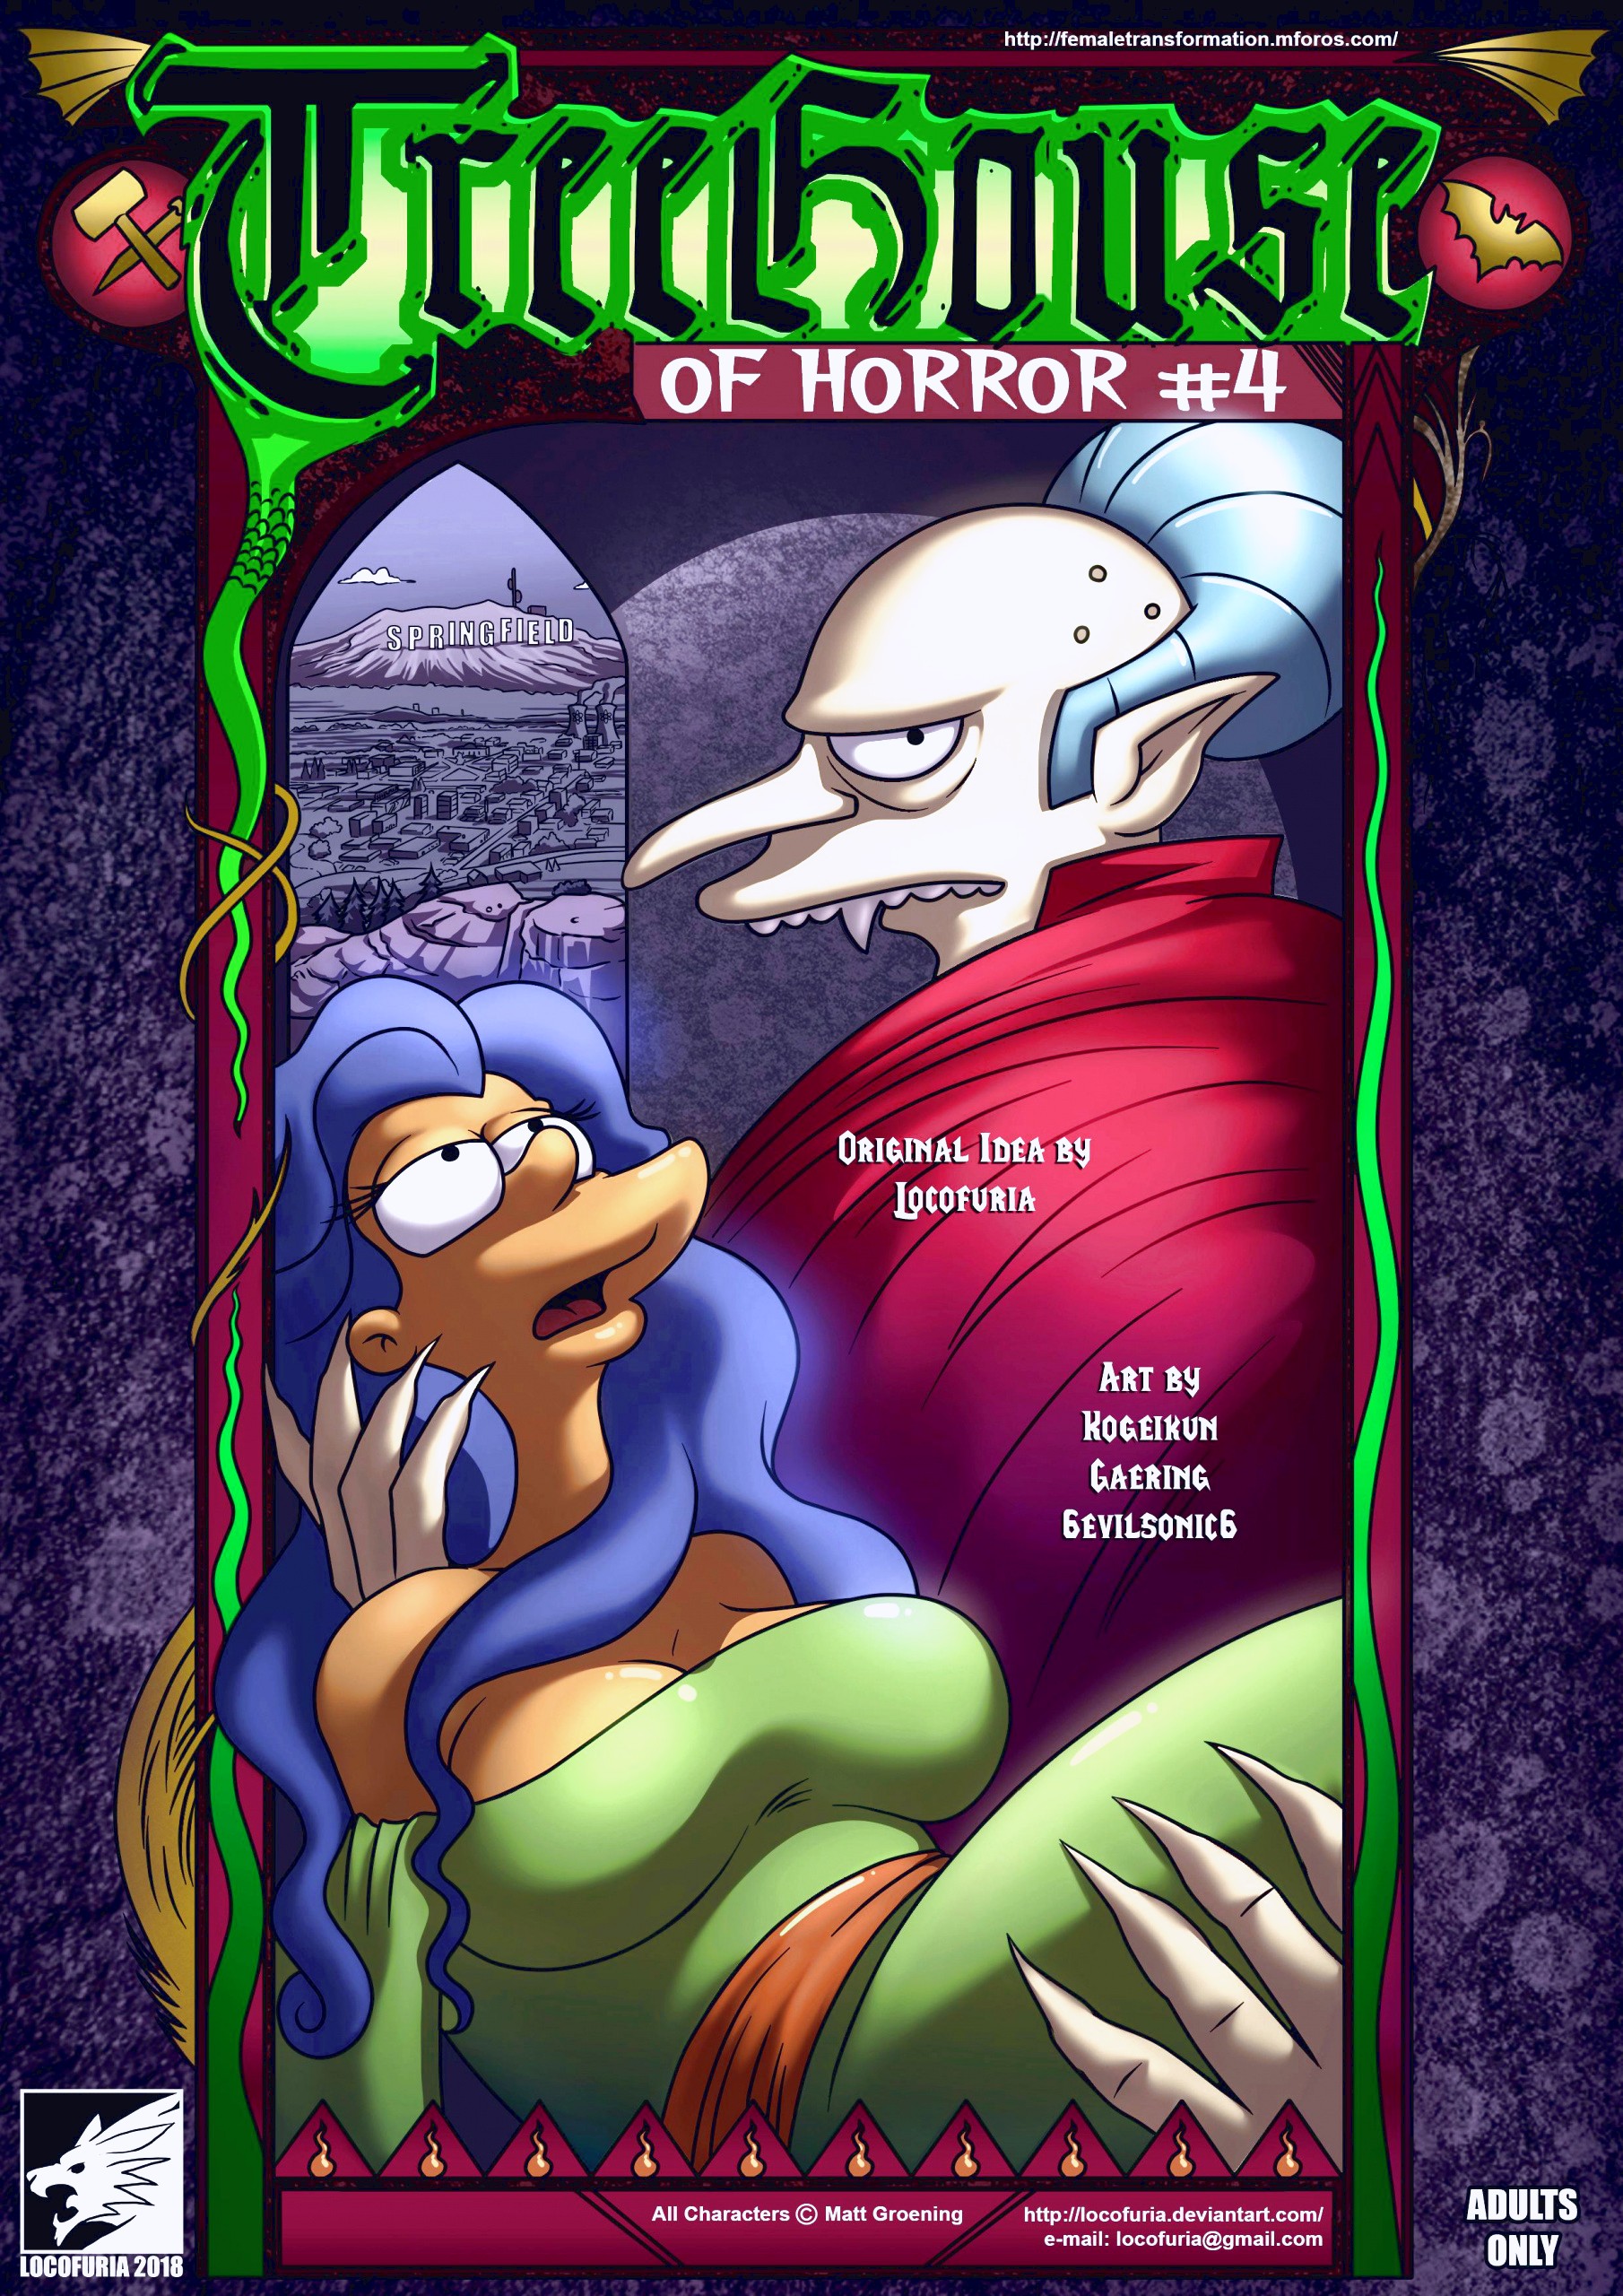 Treehouse of Horror 4 porn comic page 01 on category The Simpsons